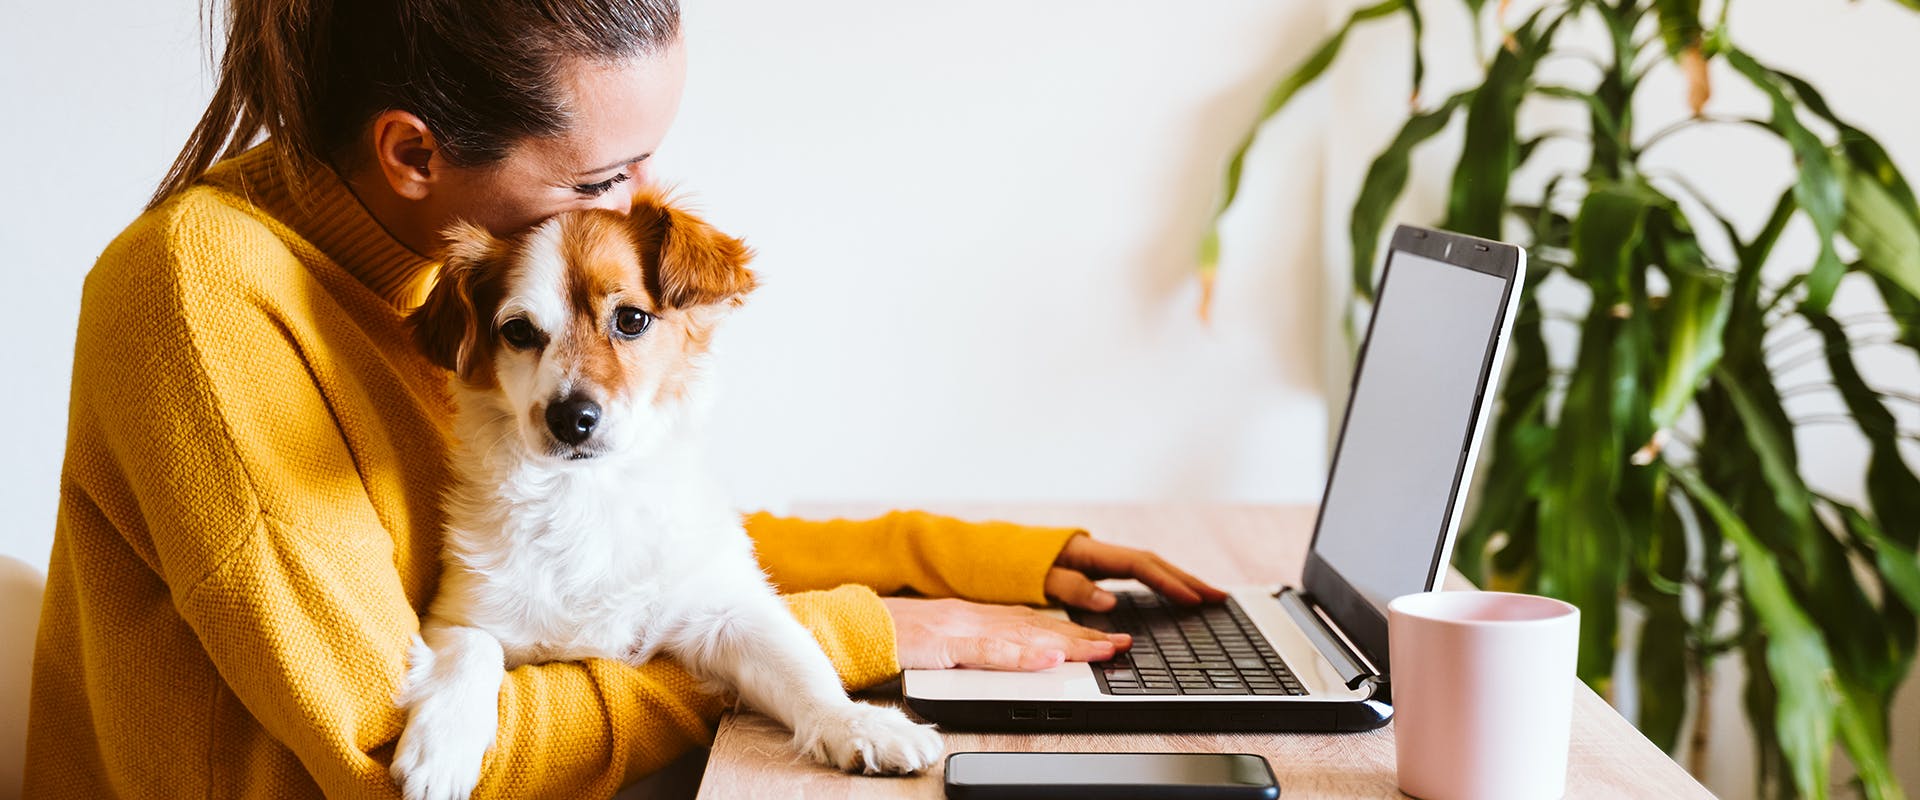 A woman working on her laptop with a cute dog sat on her lap